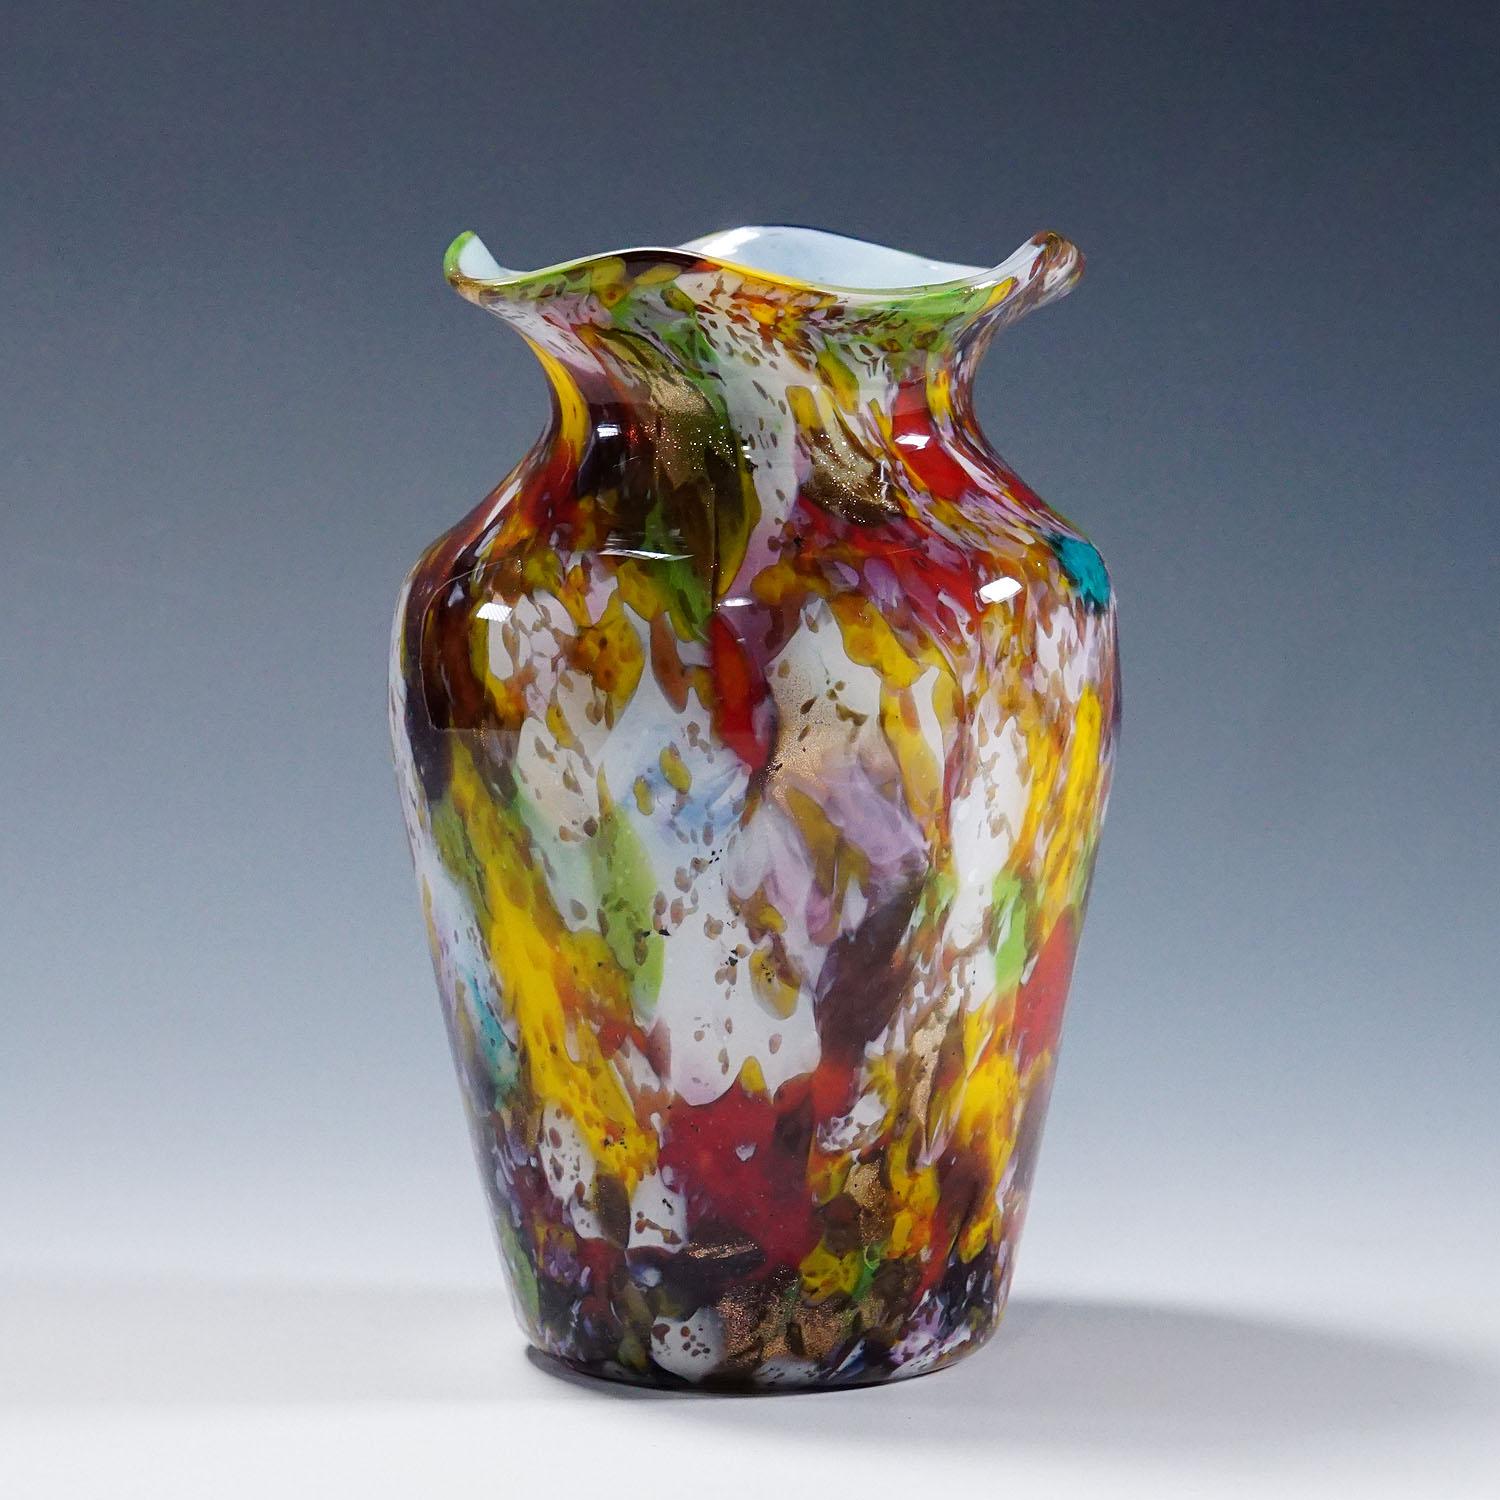 A Macchie Art Glass Vase by Artisti Barovier Attribution, Murano ca. 1920s

A rare Murano art glass vase manufactured most probably by Artisti Barovier around 1920s. Thin opaque white glass with multicoloured glass and aventurine inclusions